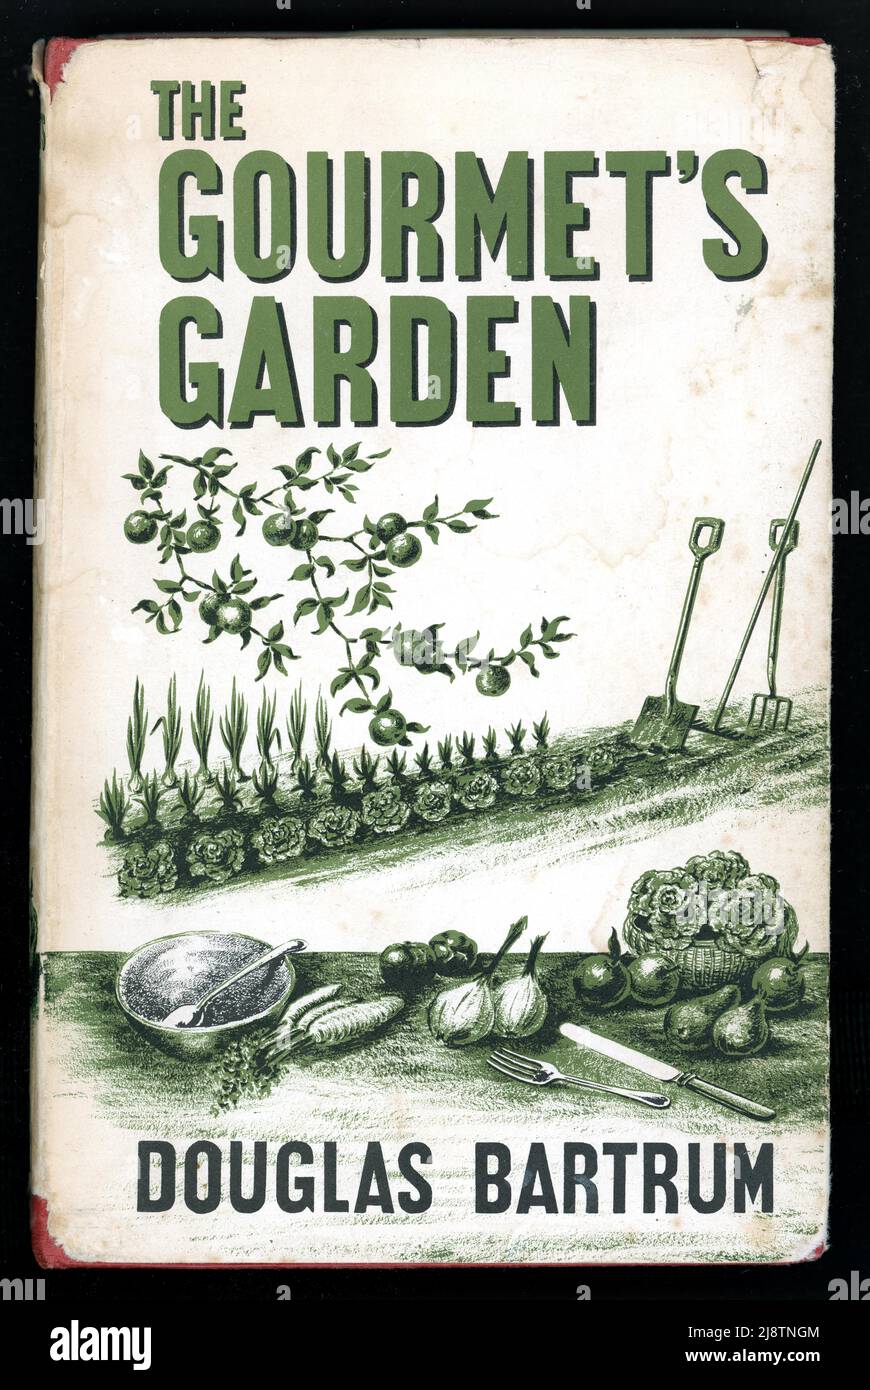 Original copy of The Gourmet's Garden by Douglas Bartram, Illustrated by Richard Shirley Smitth, published by the Garden Book Club Edition,1964, London, U.K. Stock Photo